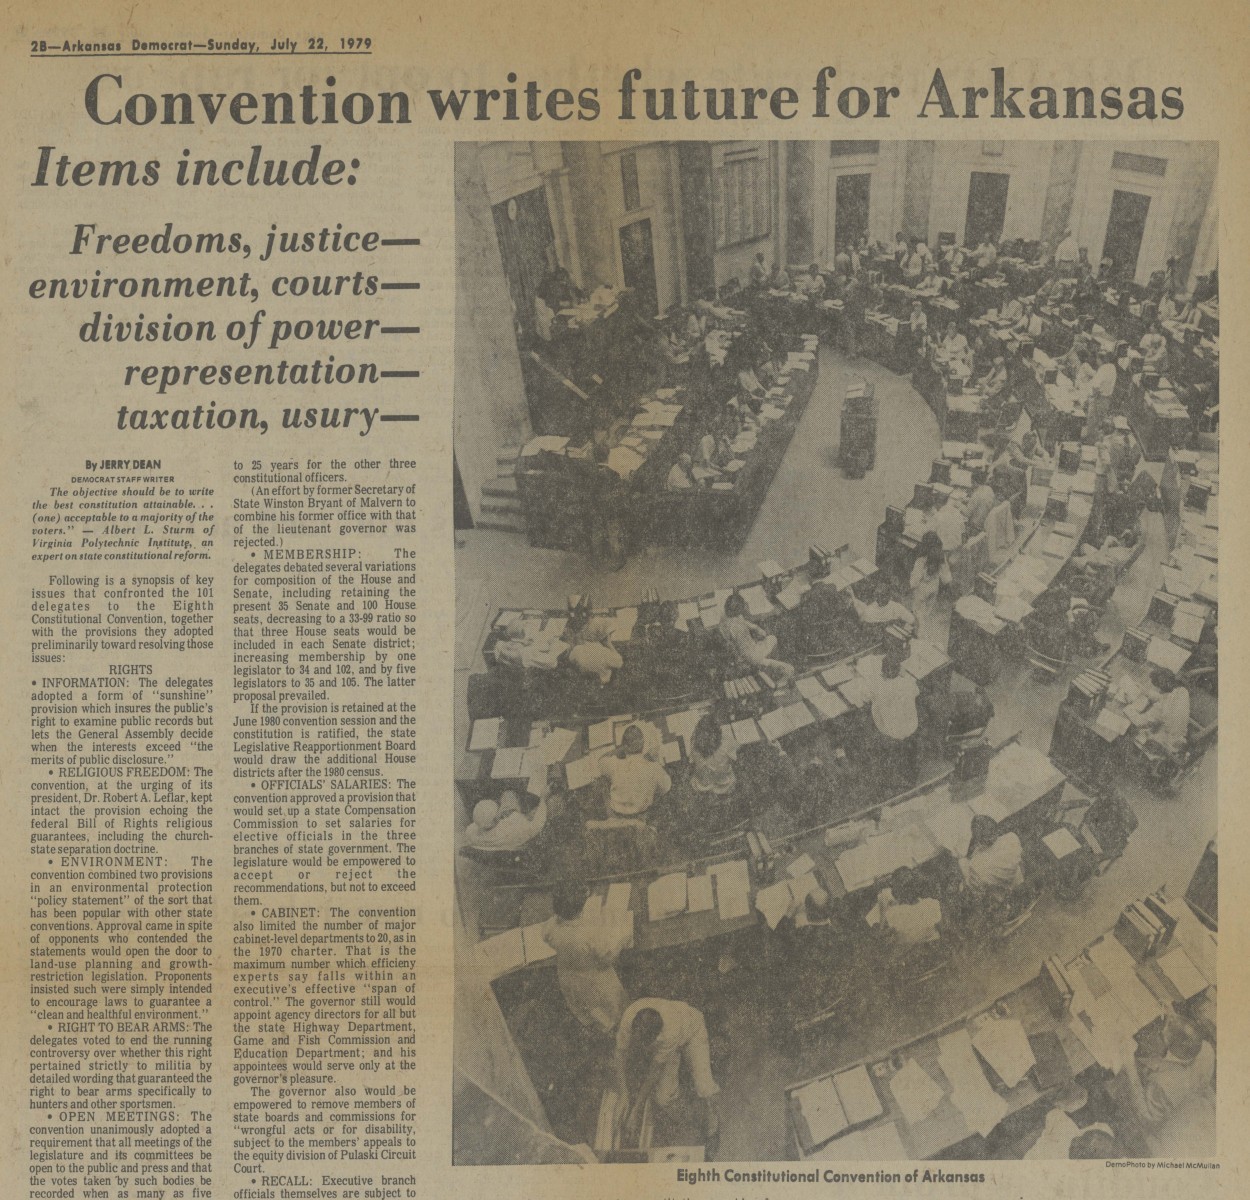 Newspaper clipping titled "Convention writes future for Arkansas. Items include: Freedoms, justice-environment, courts-division of power-representation-taxation, usury-"